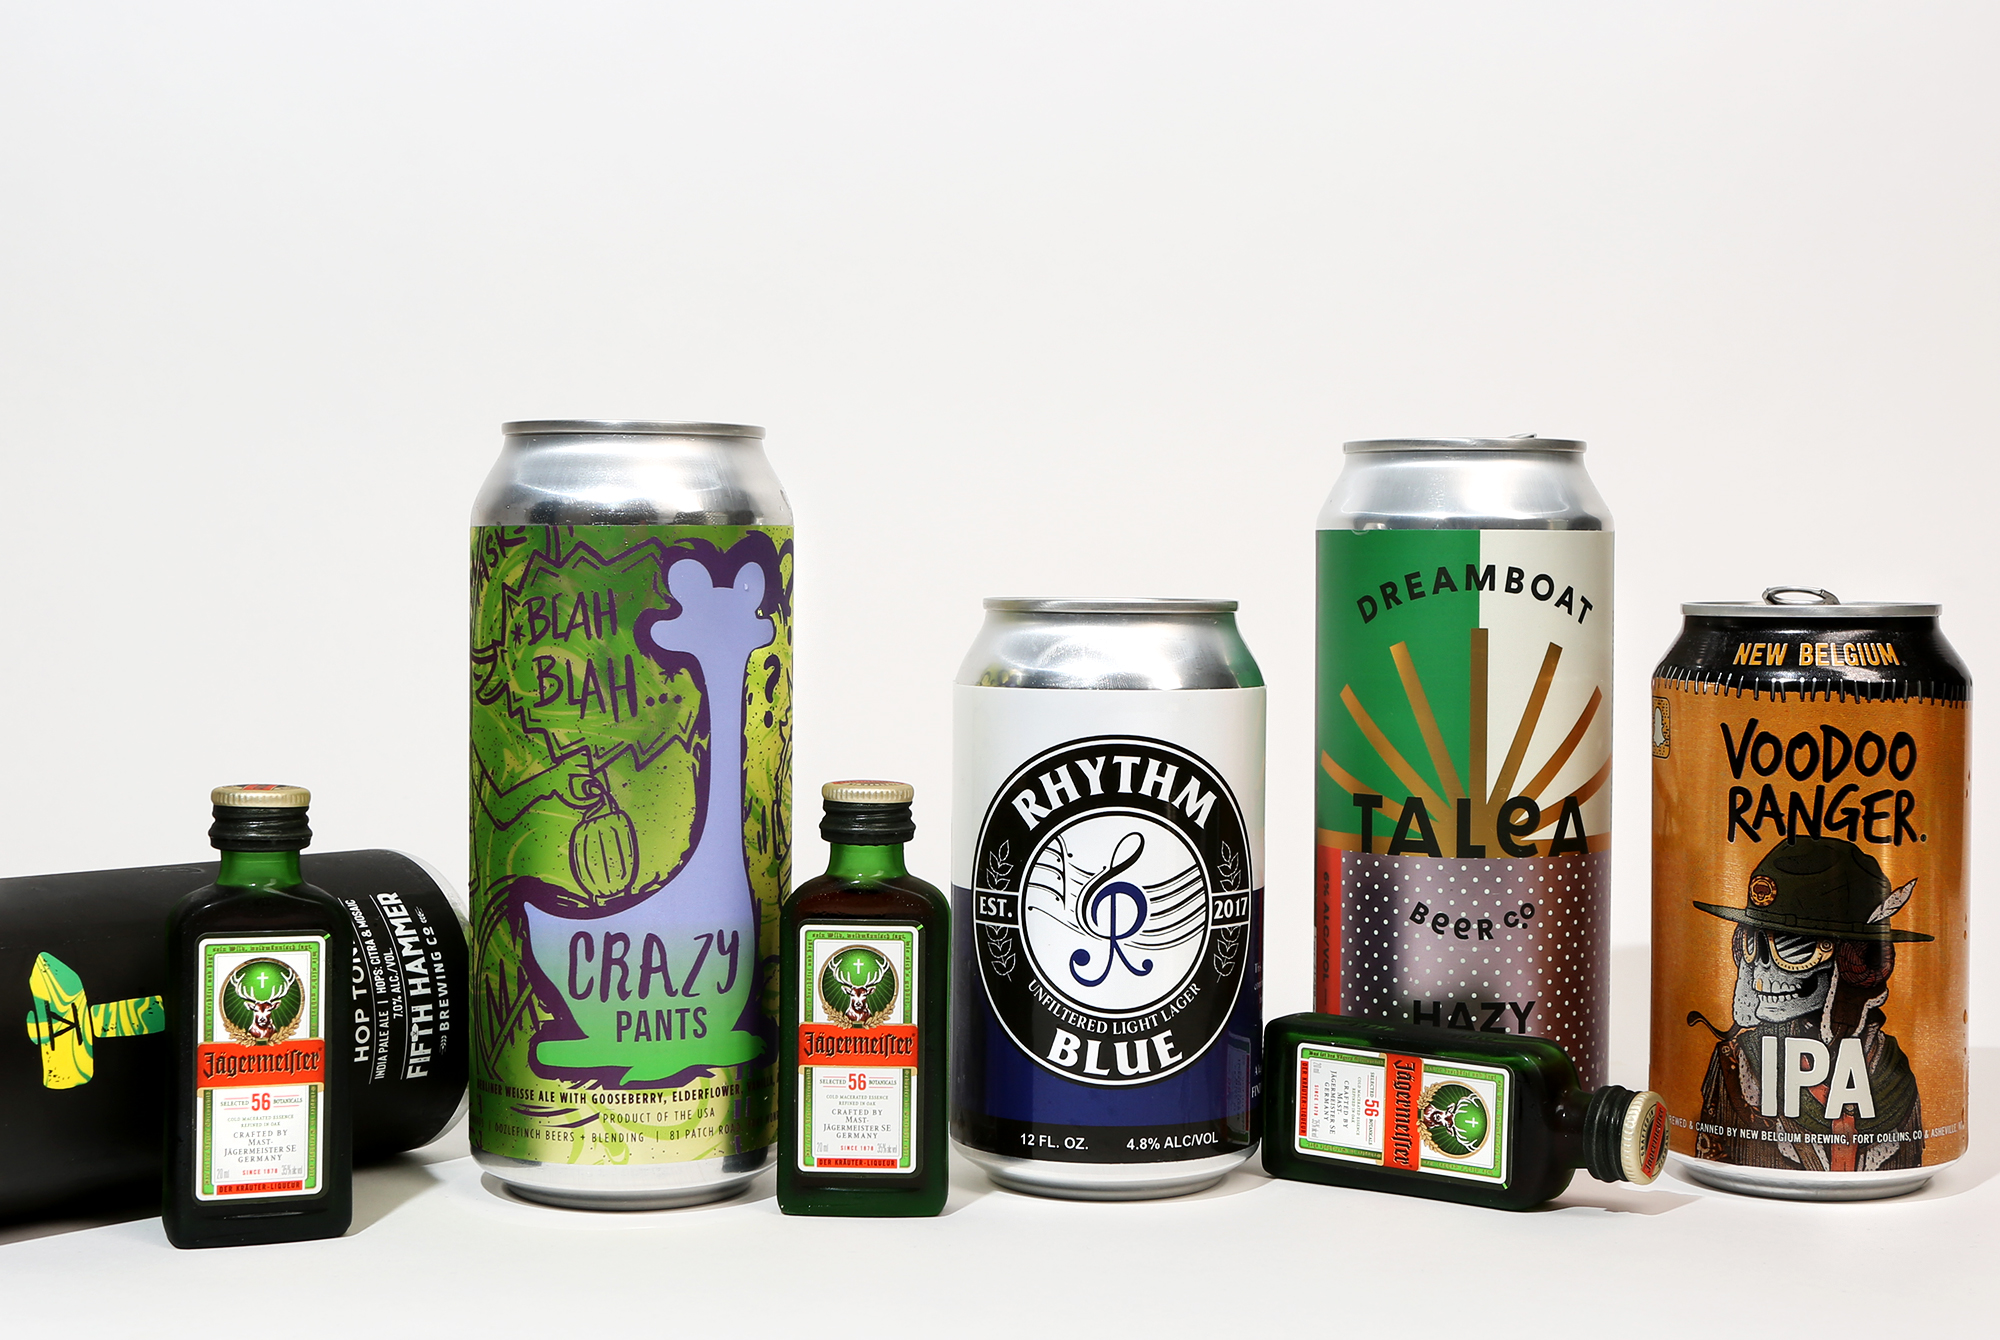 The 5 Best Beers to Pair with Jägermeister for Beers With(out) Beards